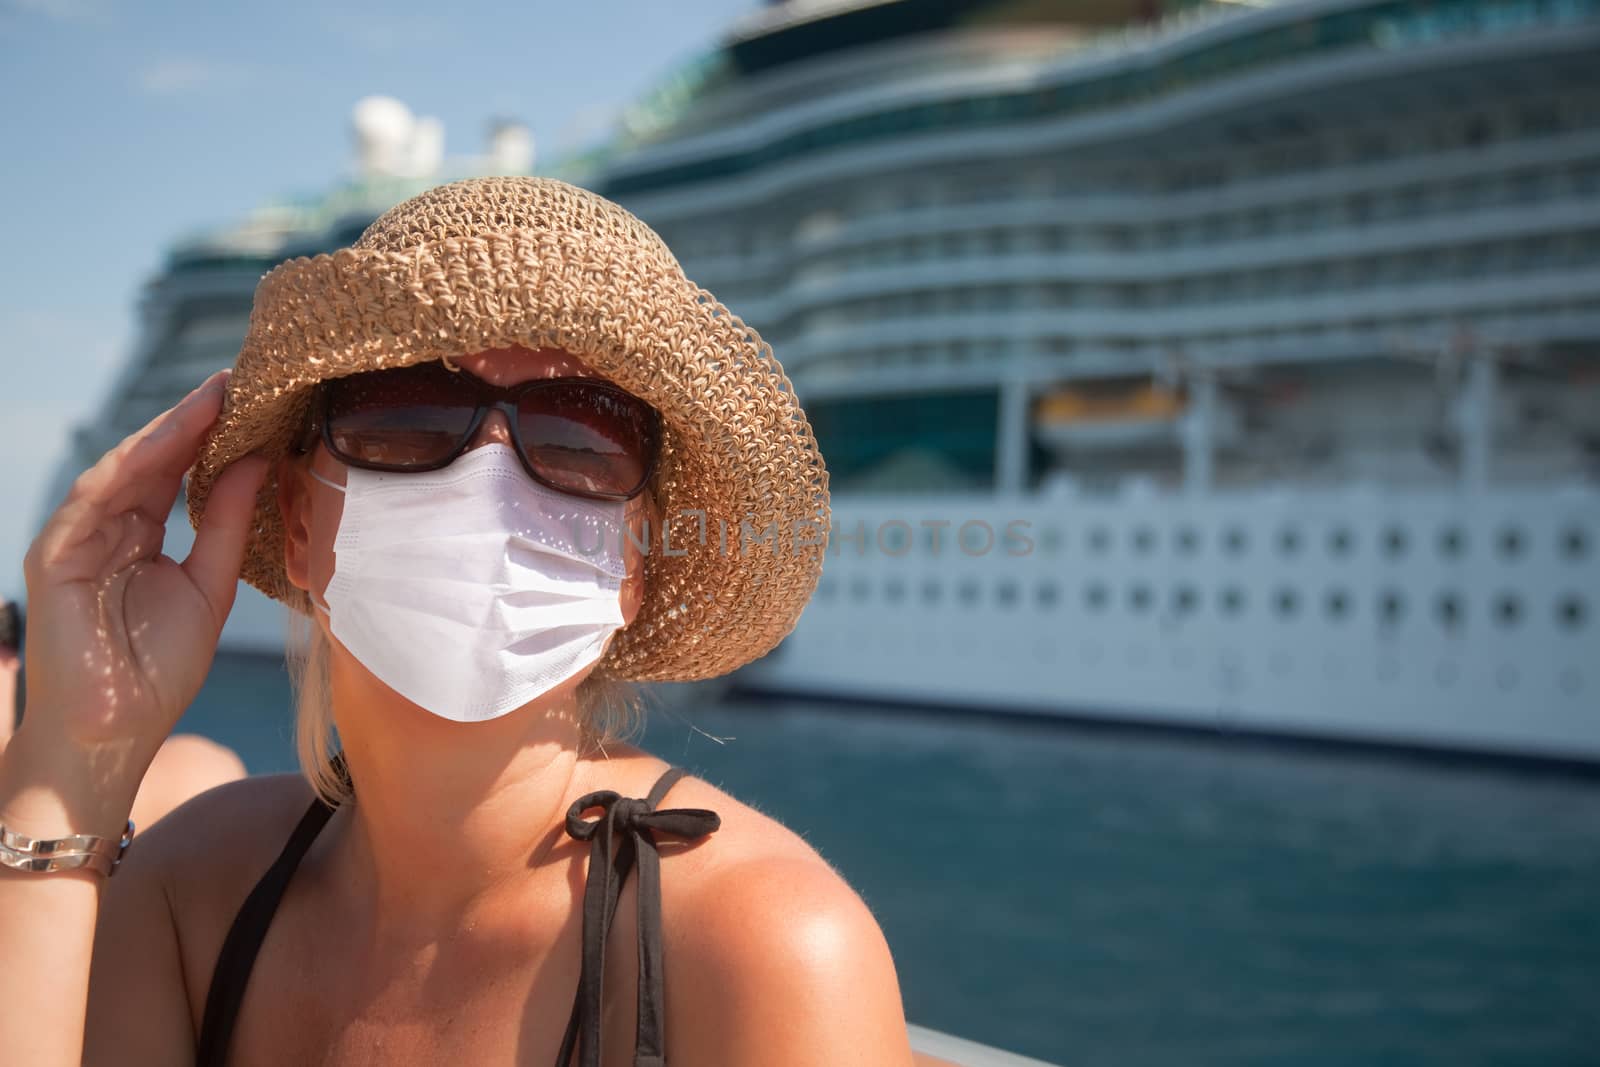 Young Adult Woman Wearing Face Mask on Tender Boat With Passenger Cruise Ship Behind.. by Feverpitched